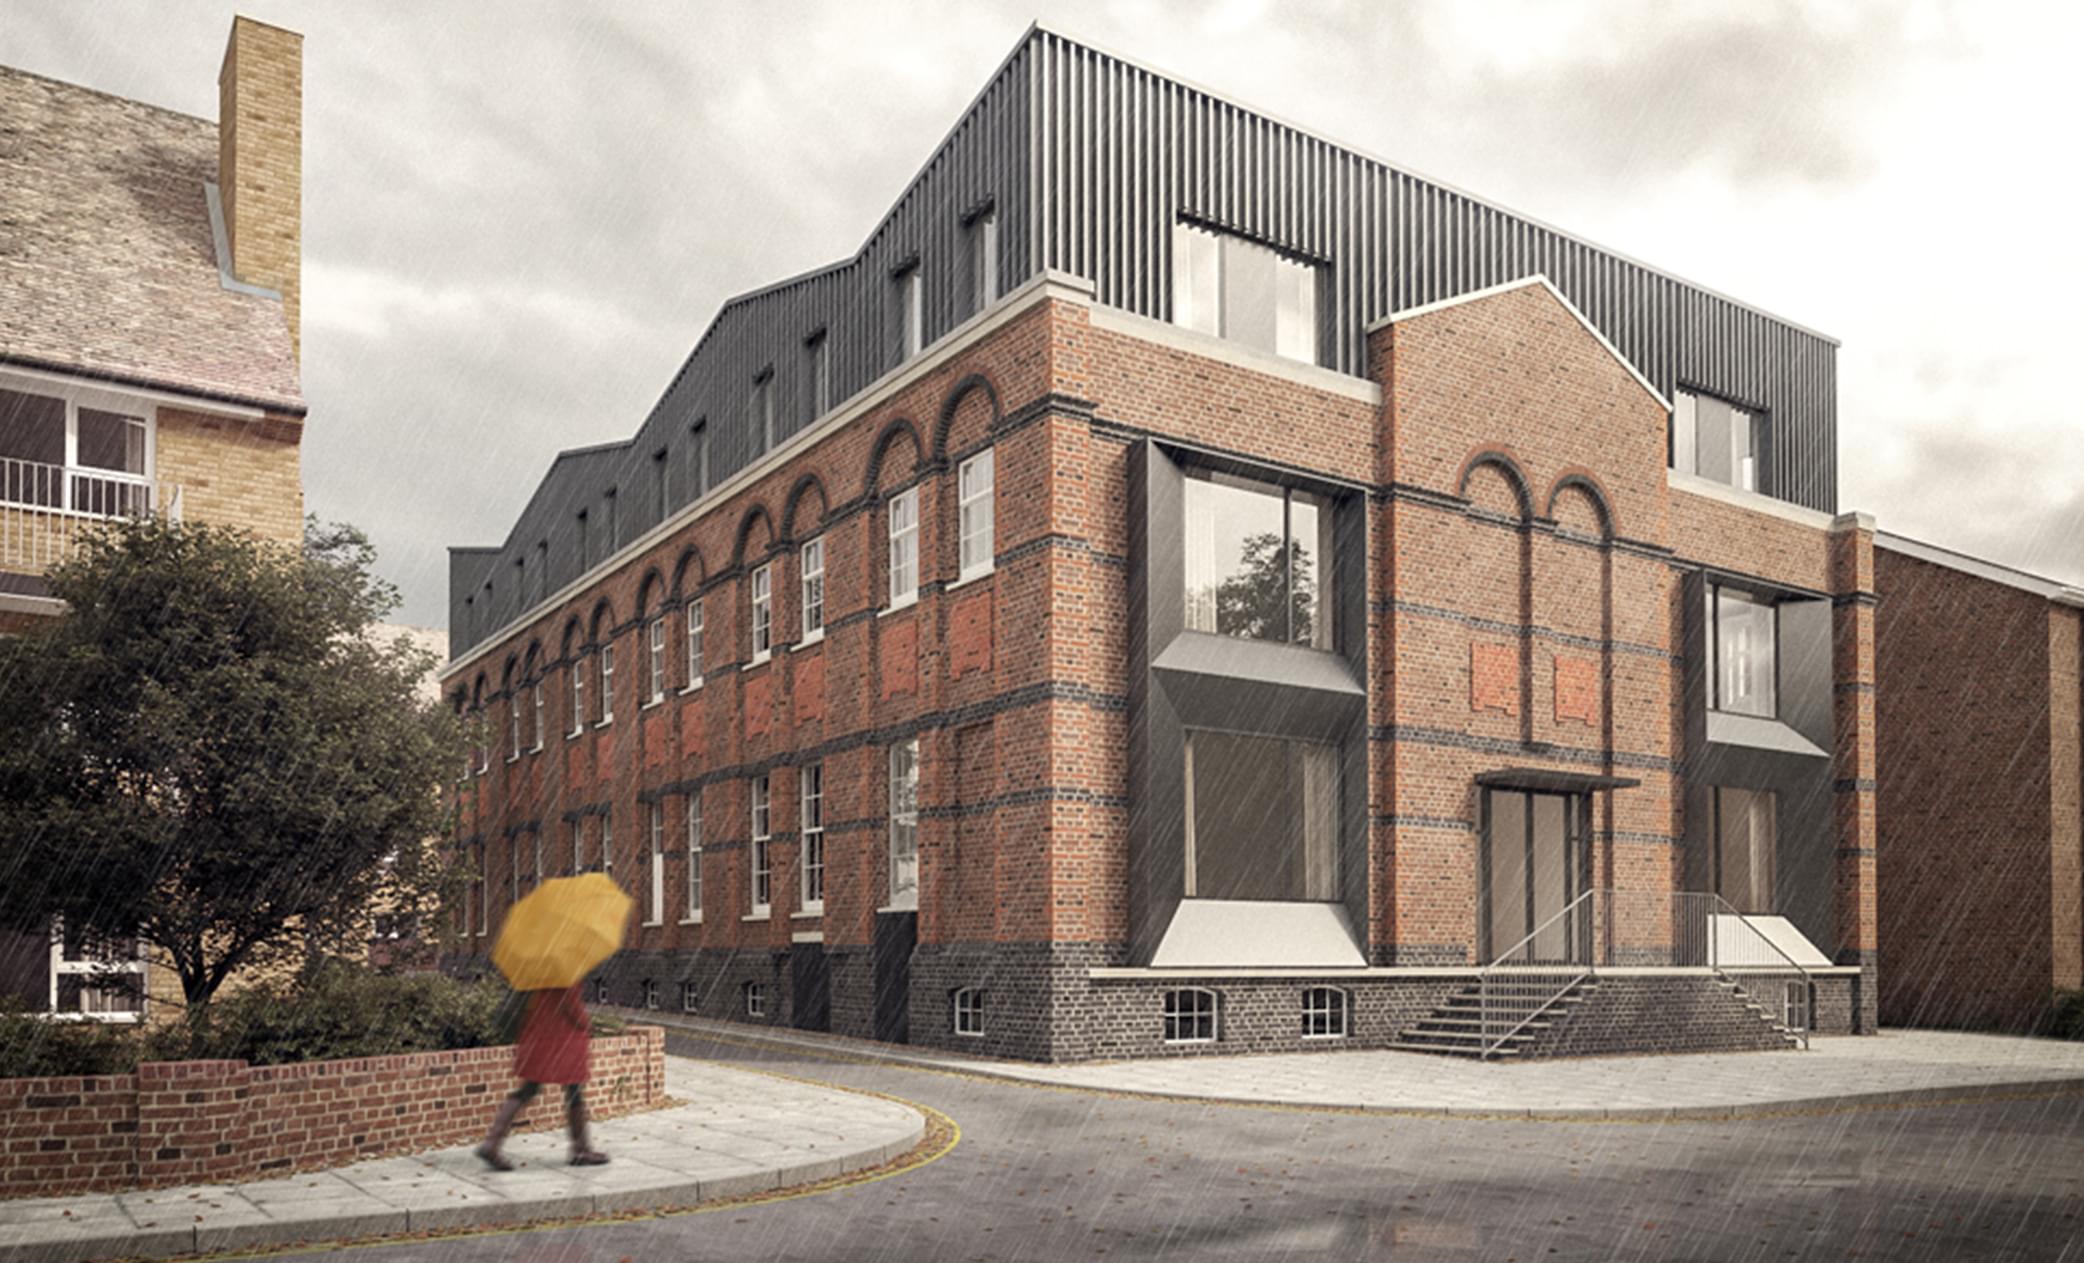 Planning Granted for Brewery House